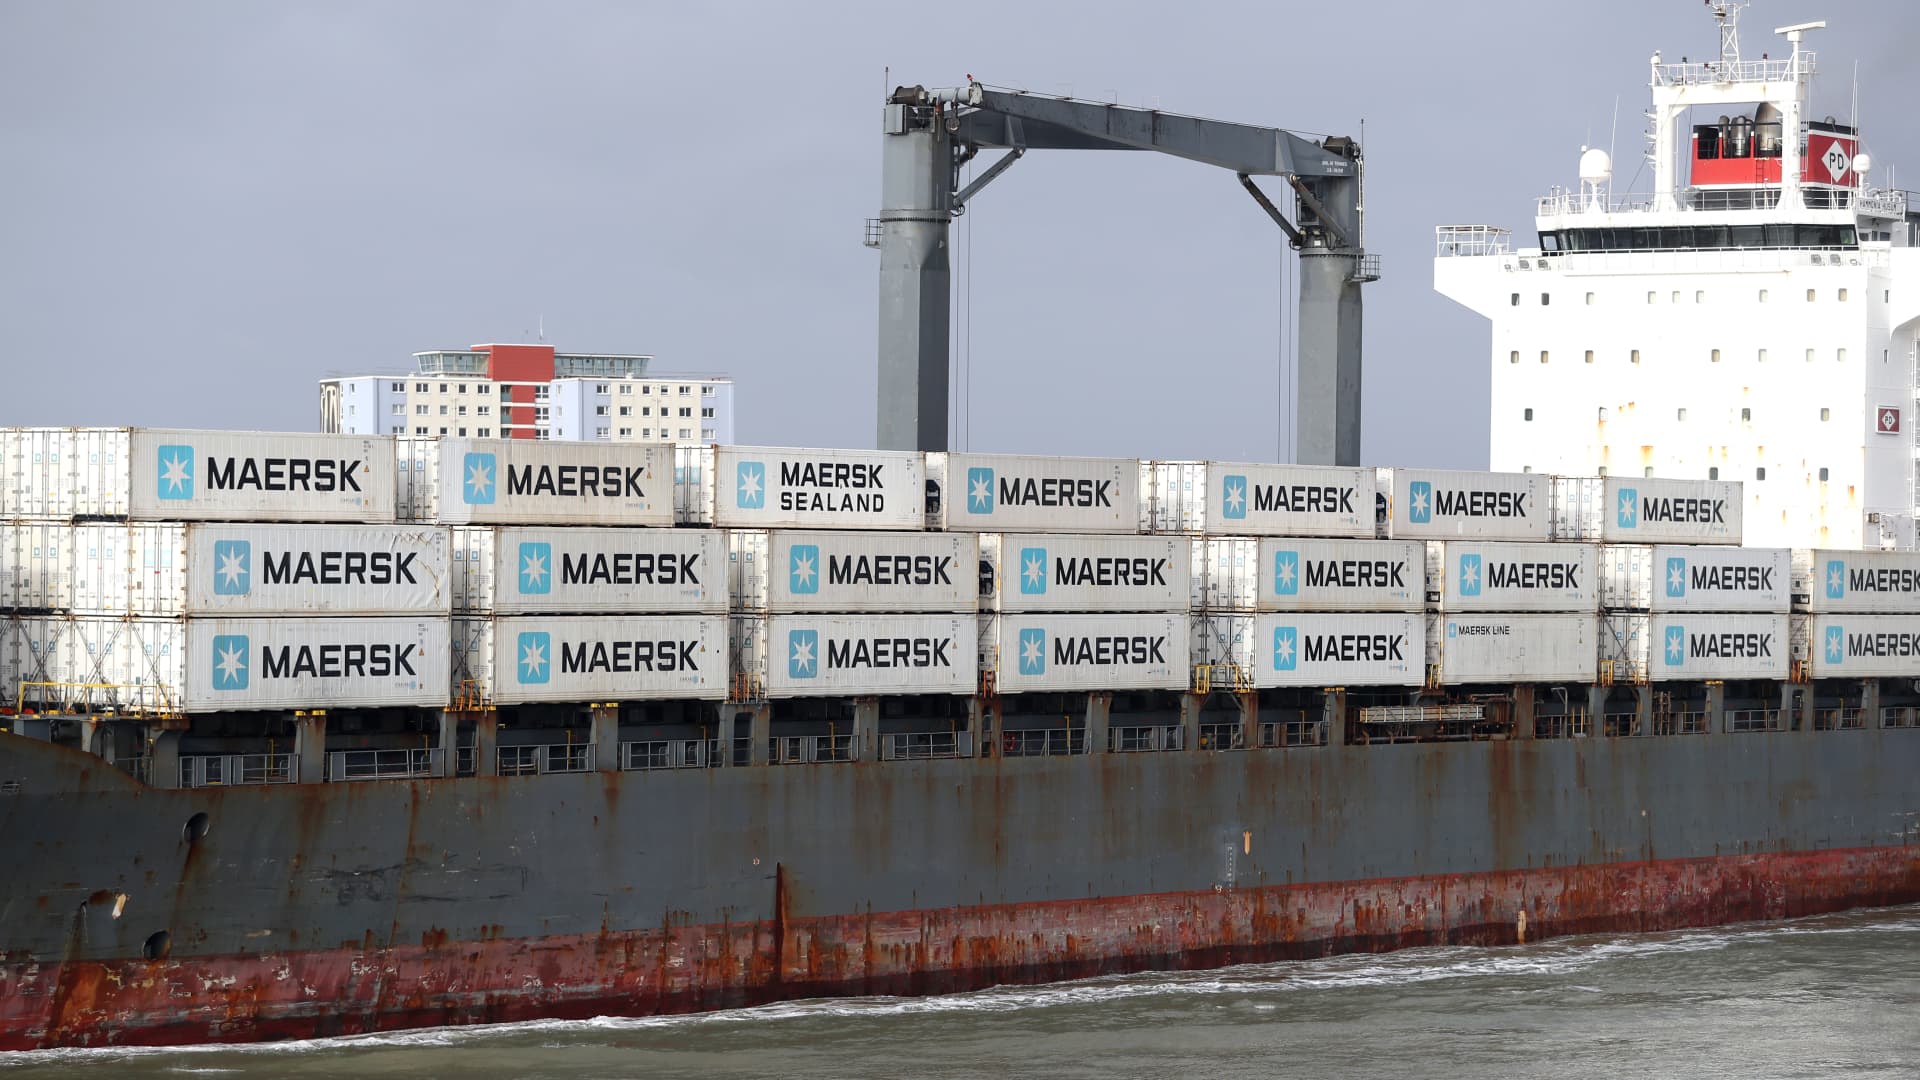 World’s largest container shipping firm Maersk, a barometer for global trade, warns of ‘dark clouds on the horizon’